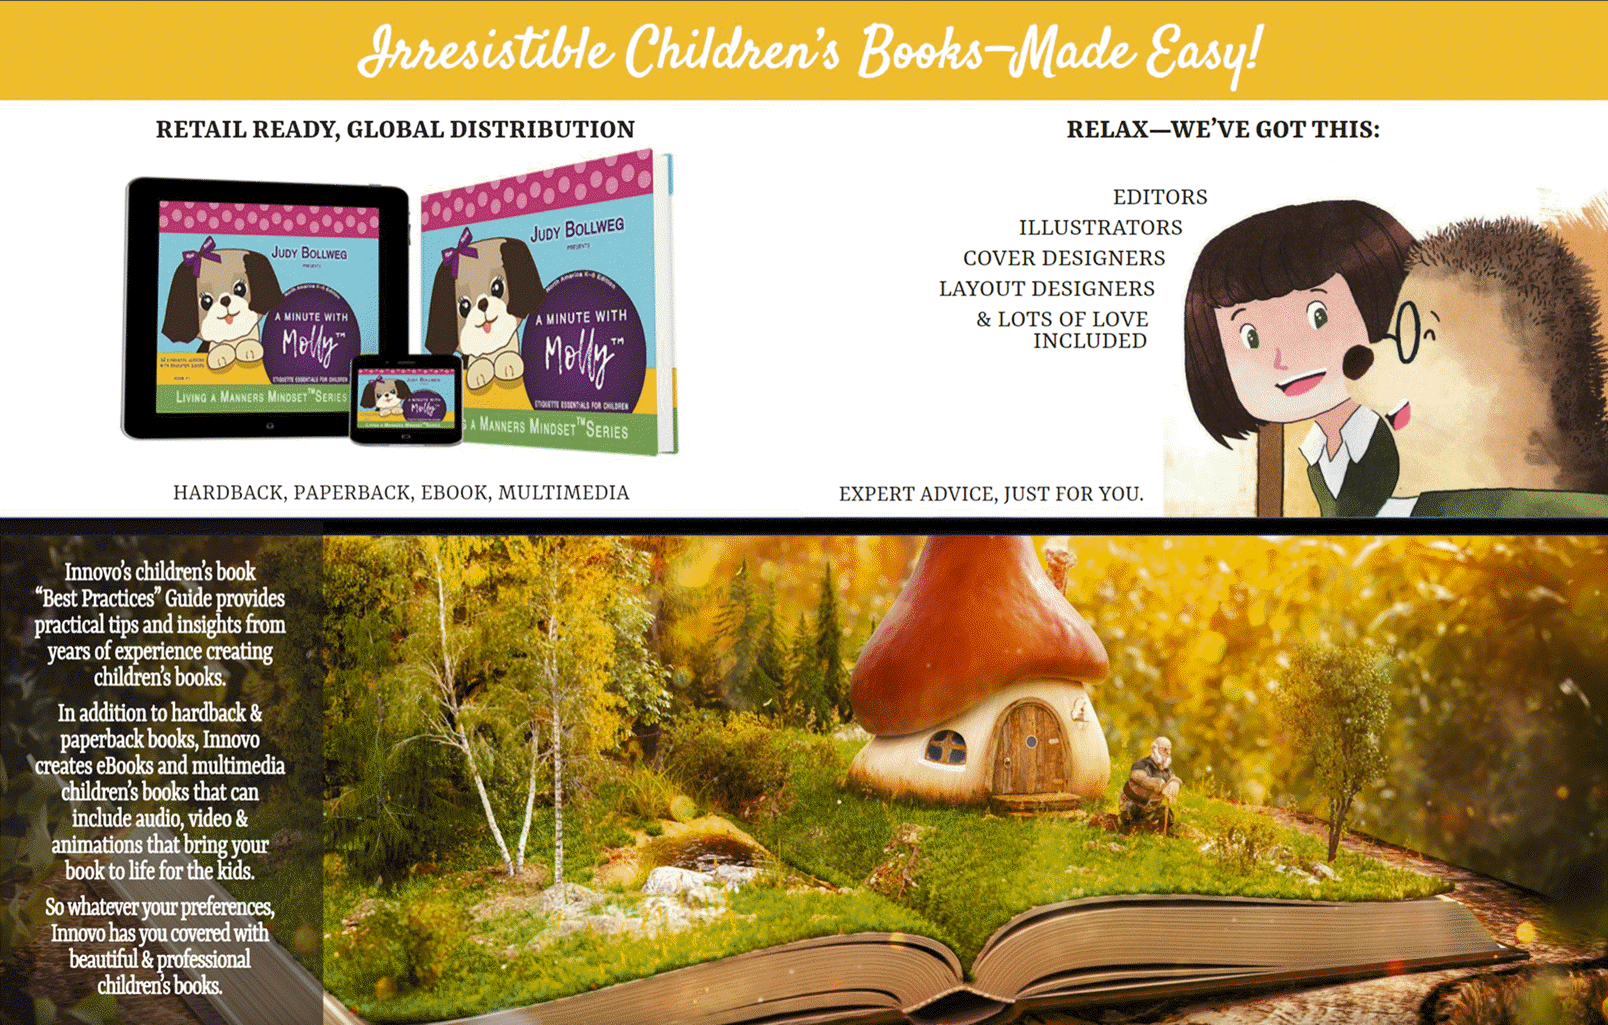 IInnovo Irresistible Children's Book Publishing for Christian & Wholesome Markets